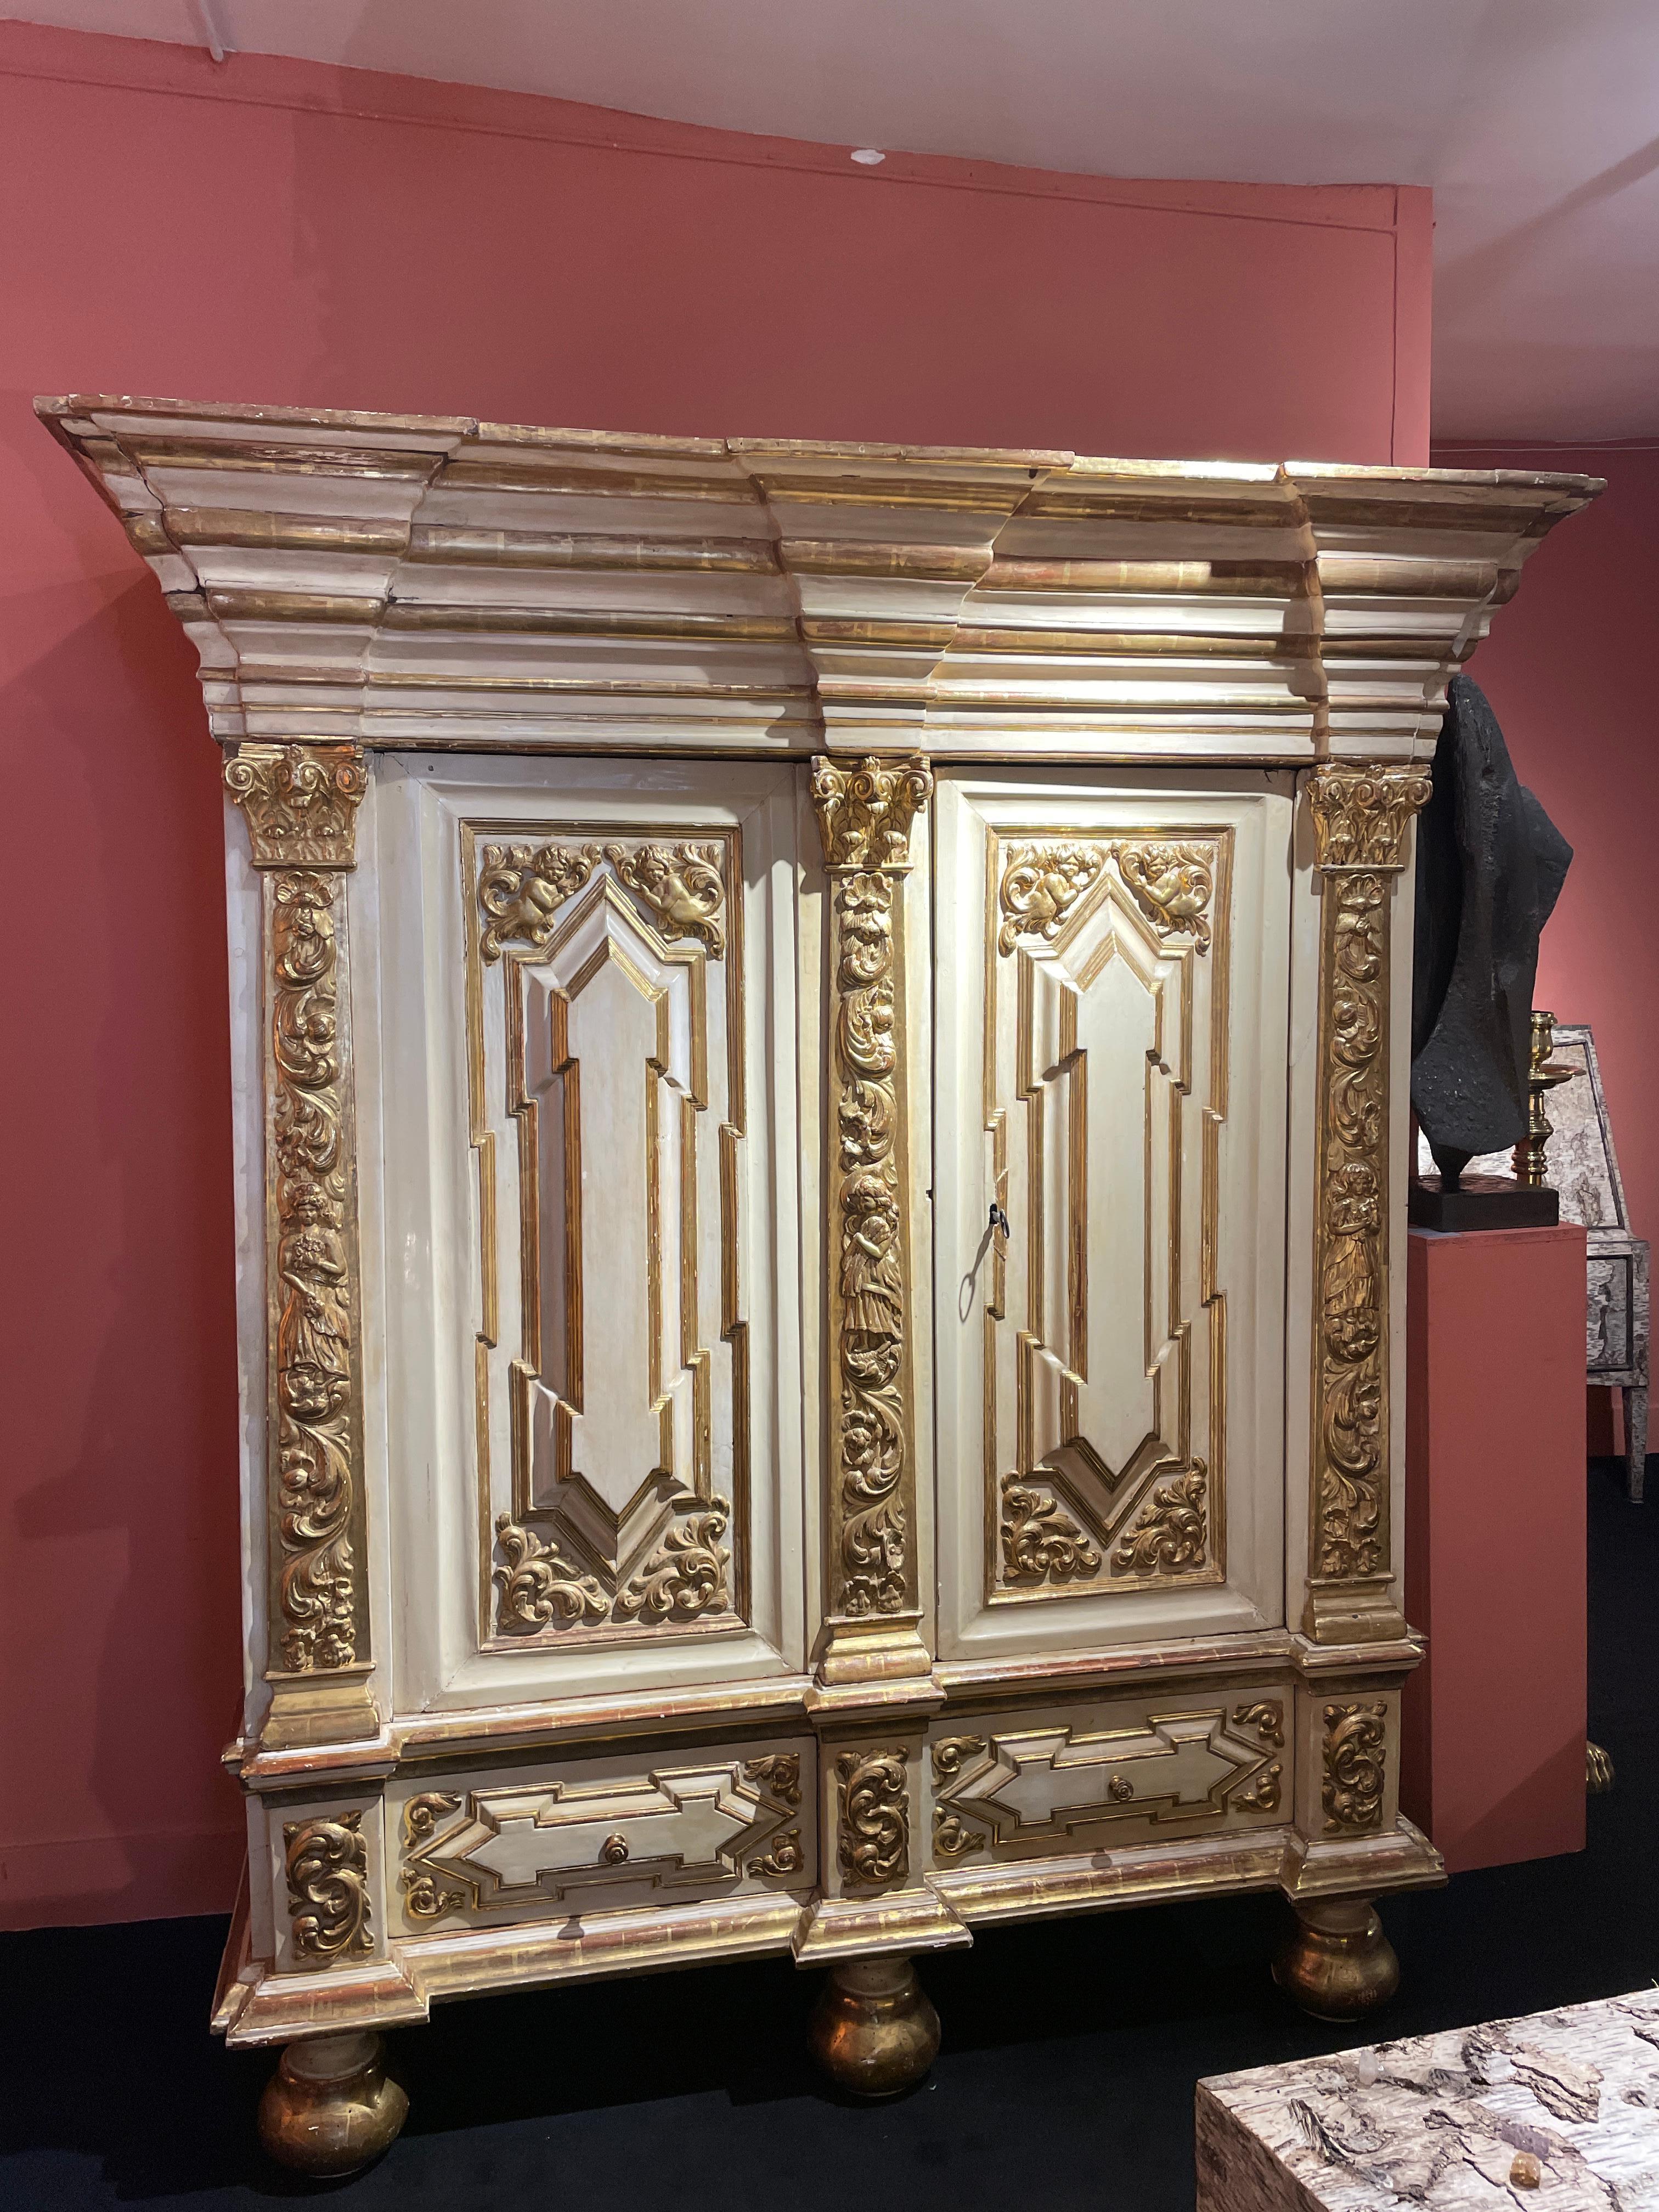 IMPORTANT WARDROBE OF THE HANSEAN REPUBLICS

ORIGIN : NORTHERN GERMANY
PERIOD : LATE 16th – EARLY 17th CENTURY

Height : 222 cm
Width : 198 cm
Depth : 78 cm

Lacquered and gilded oak wood


This imposing wardrobe is punctuated by three corinthian